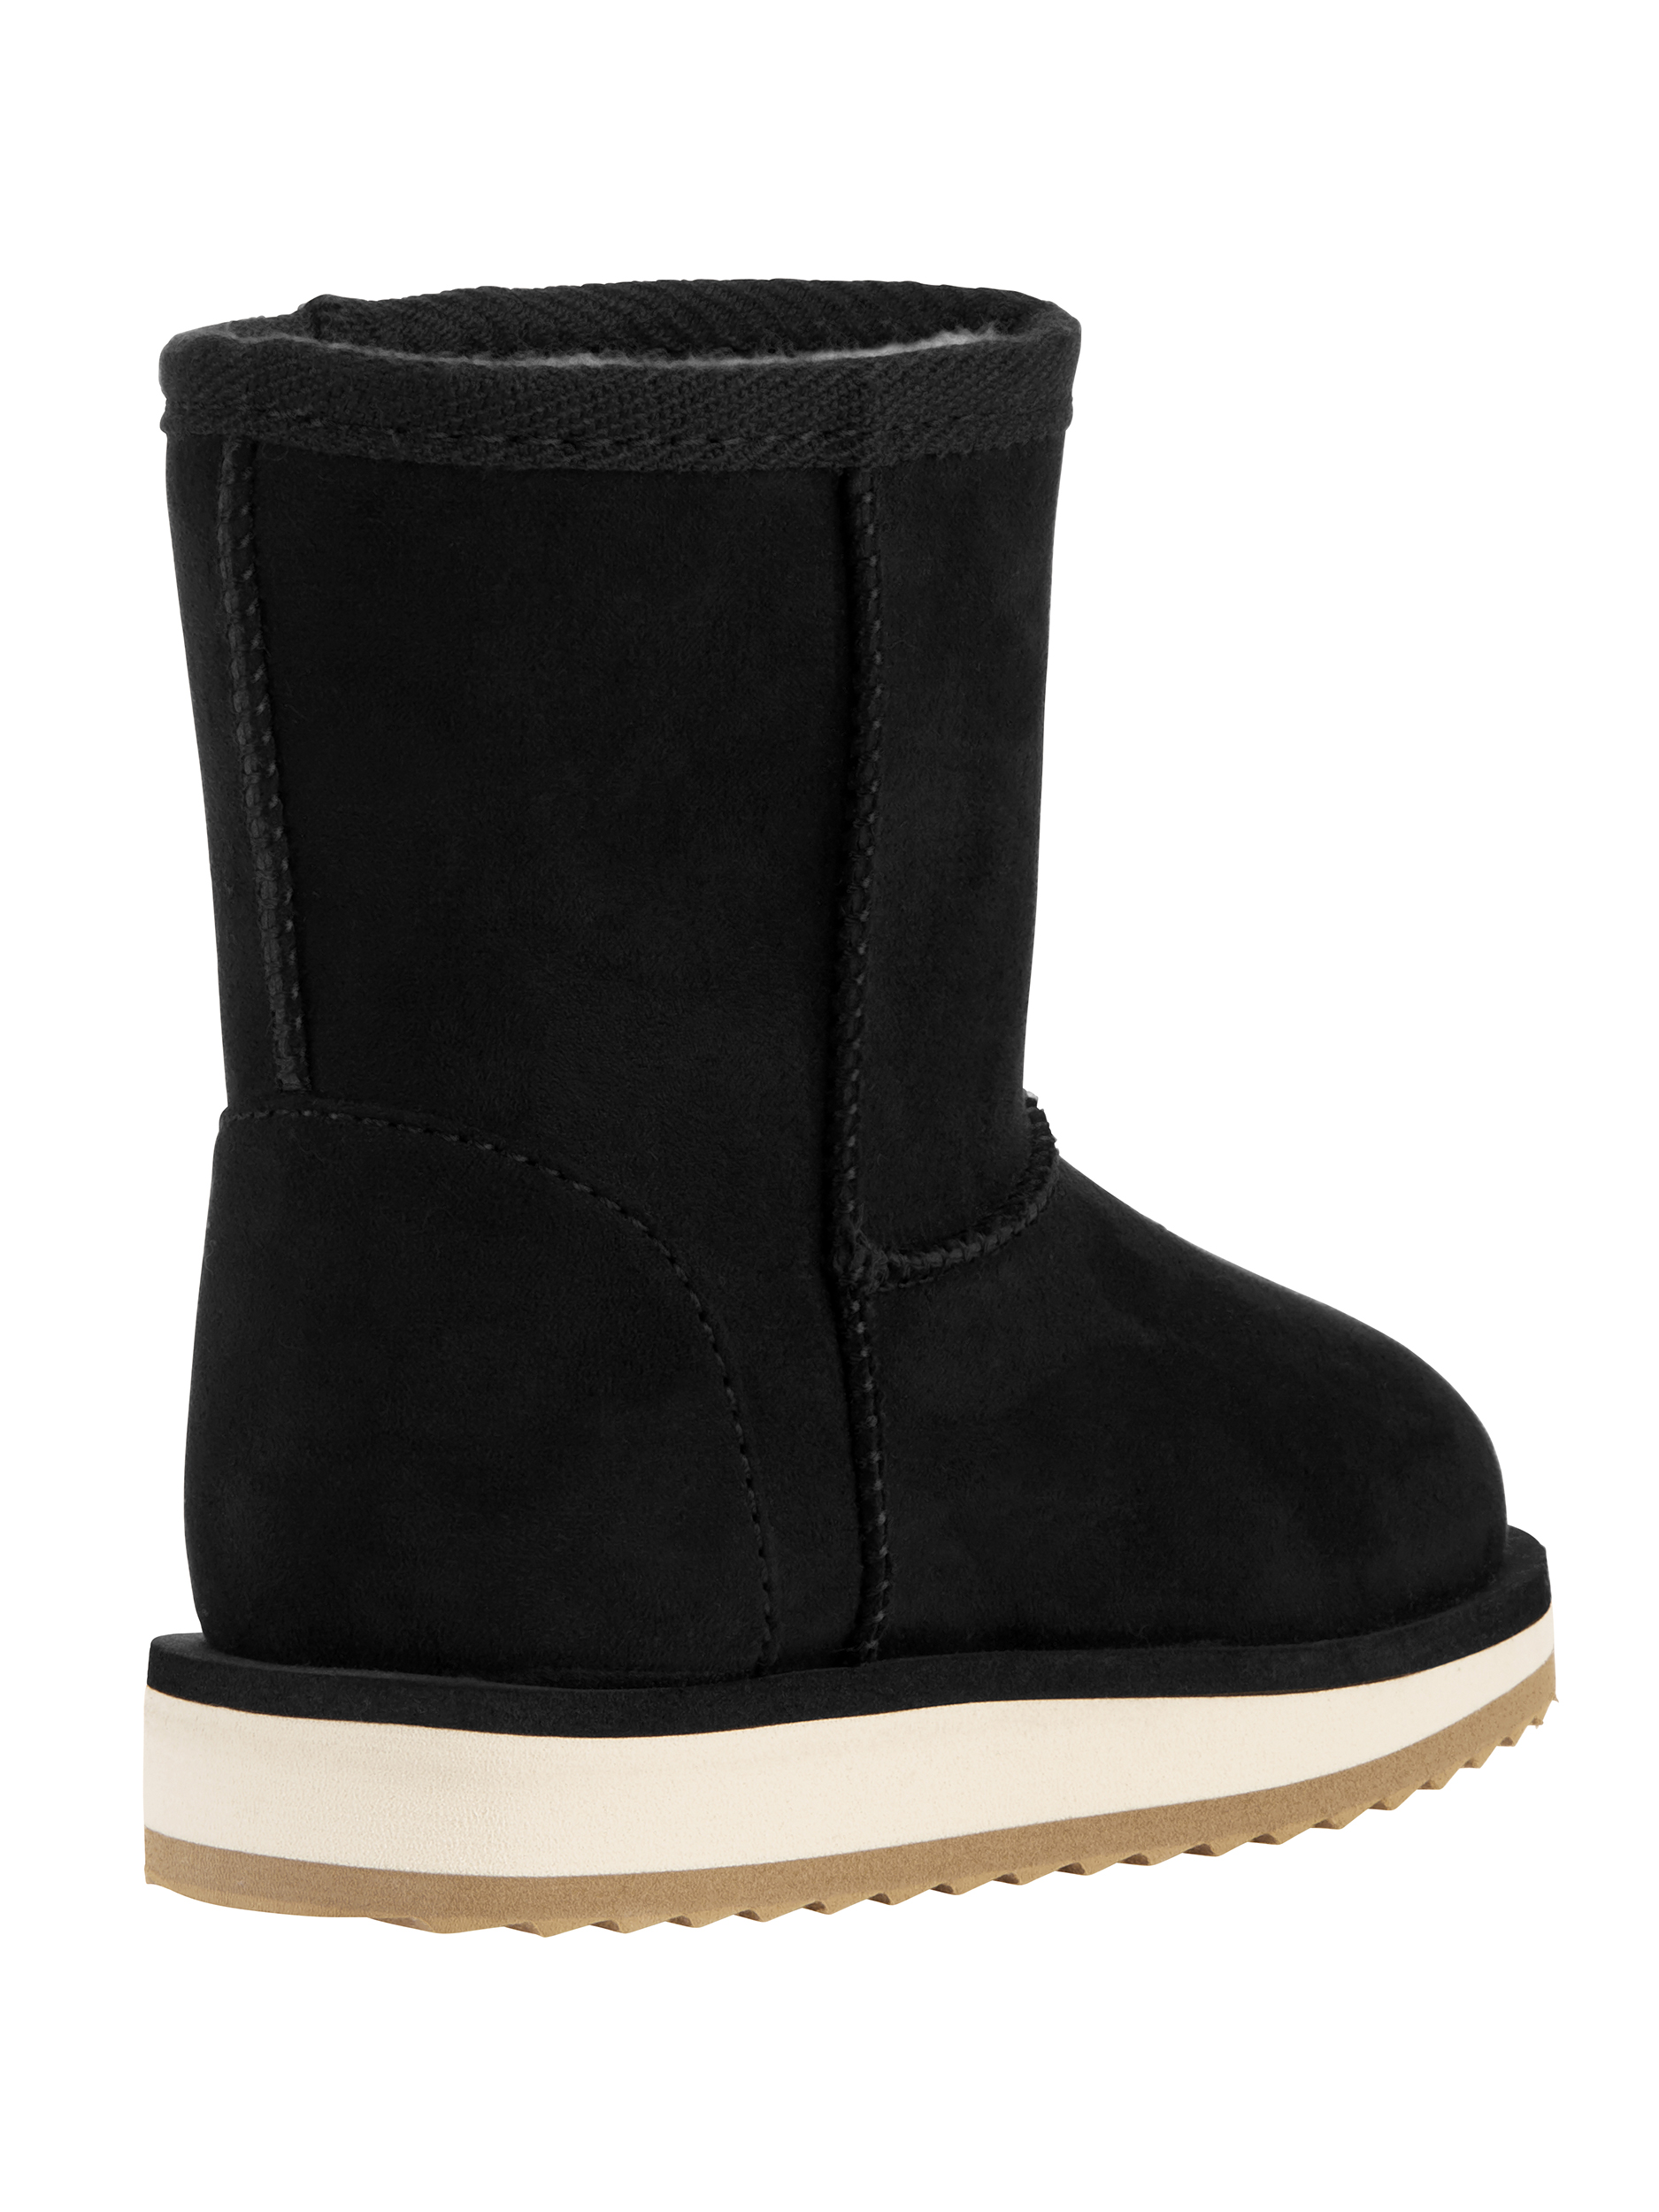 Wonder Nation Faux Shearling Boots (Toddler Girls) - image 5 of 6